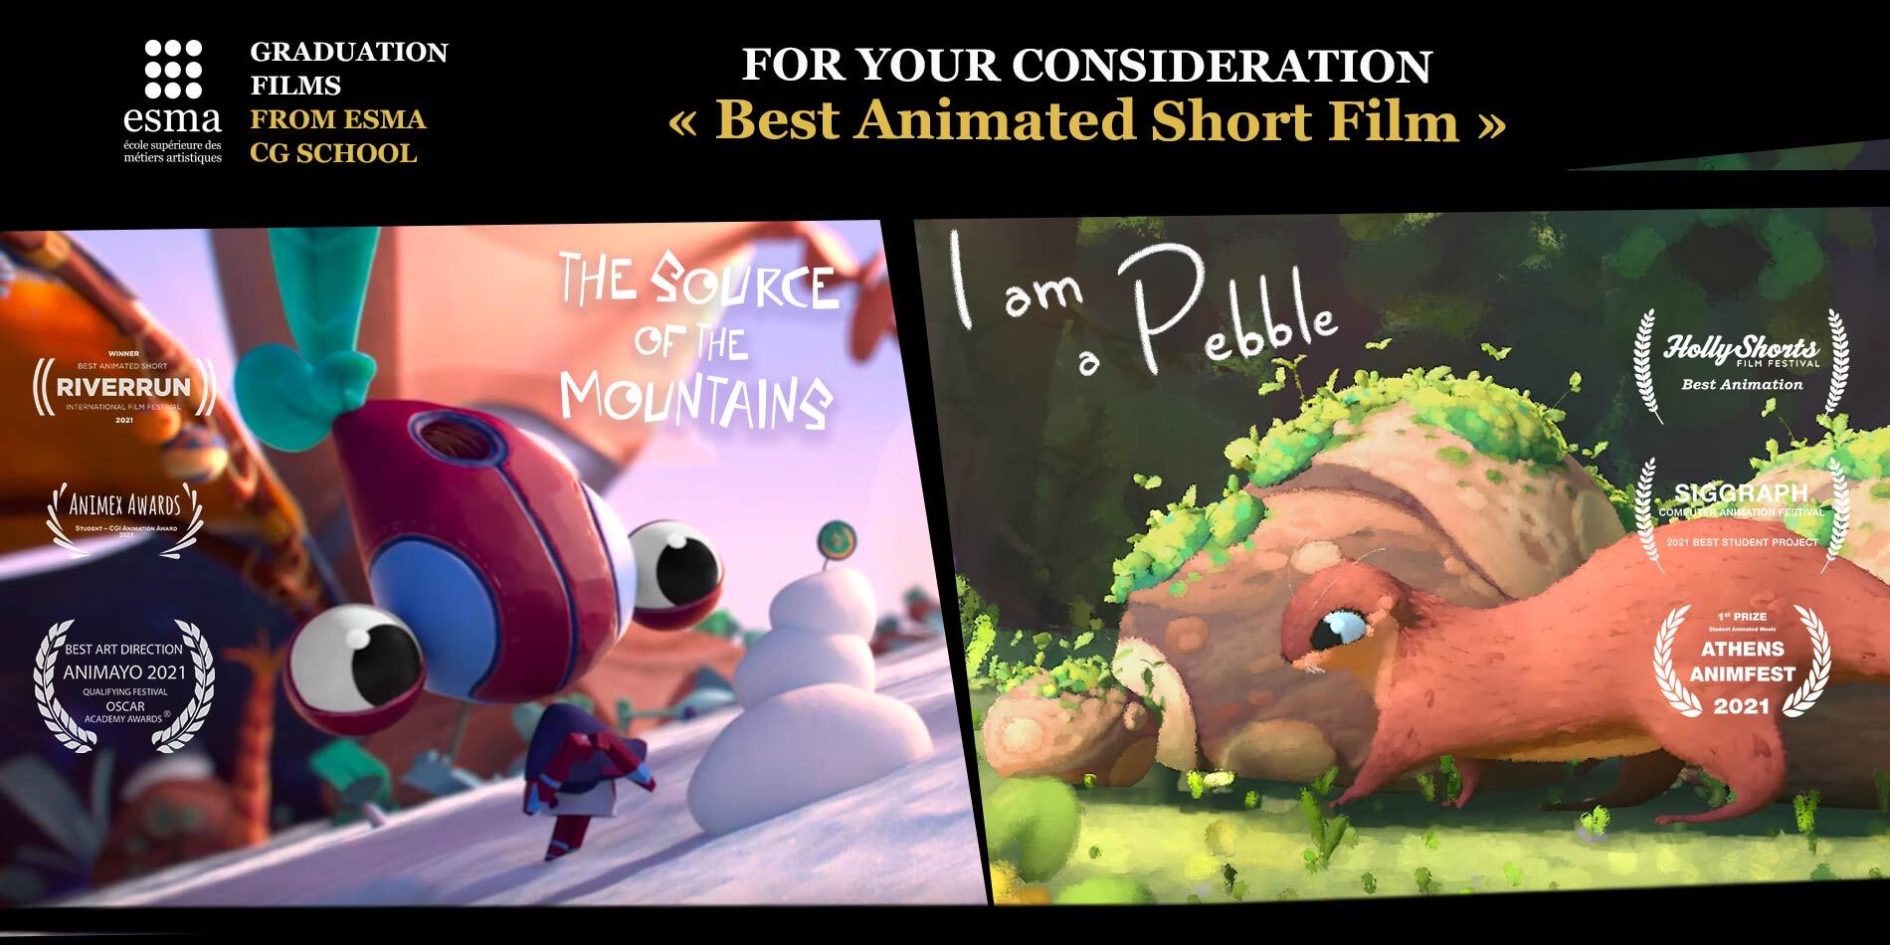 I am a Pebble” & “The source of the Mountains”: Best Animated Shorts Films?